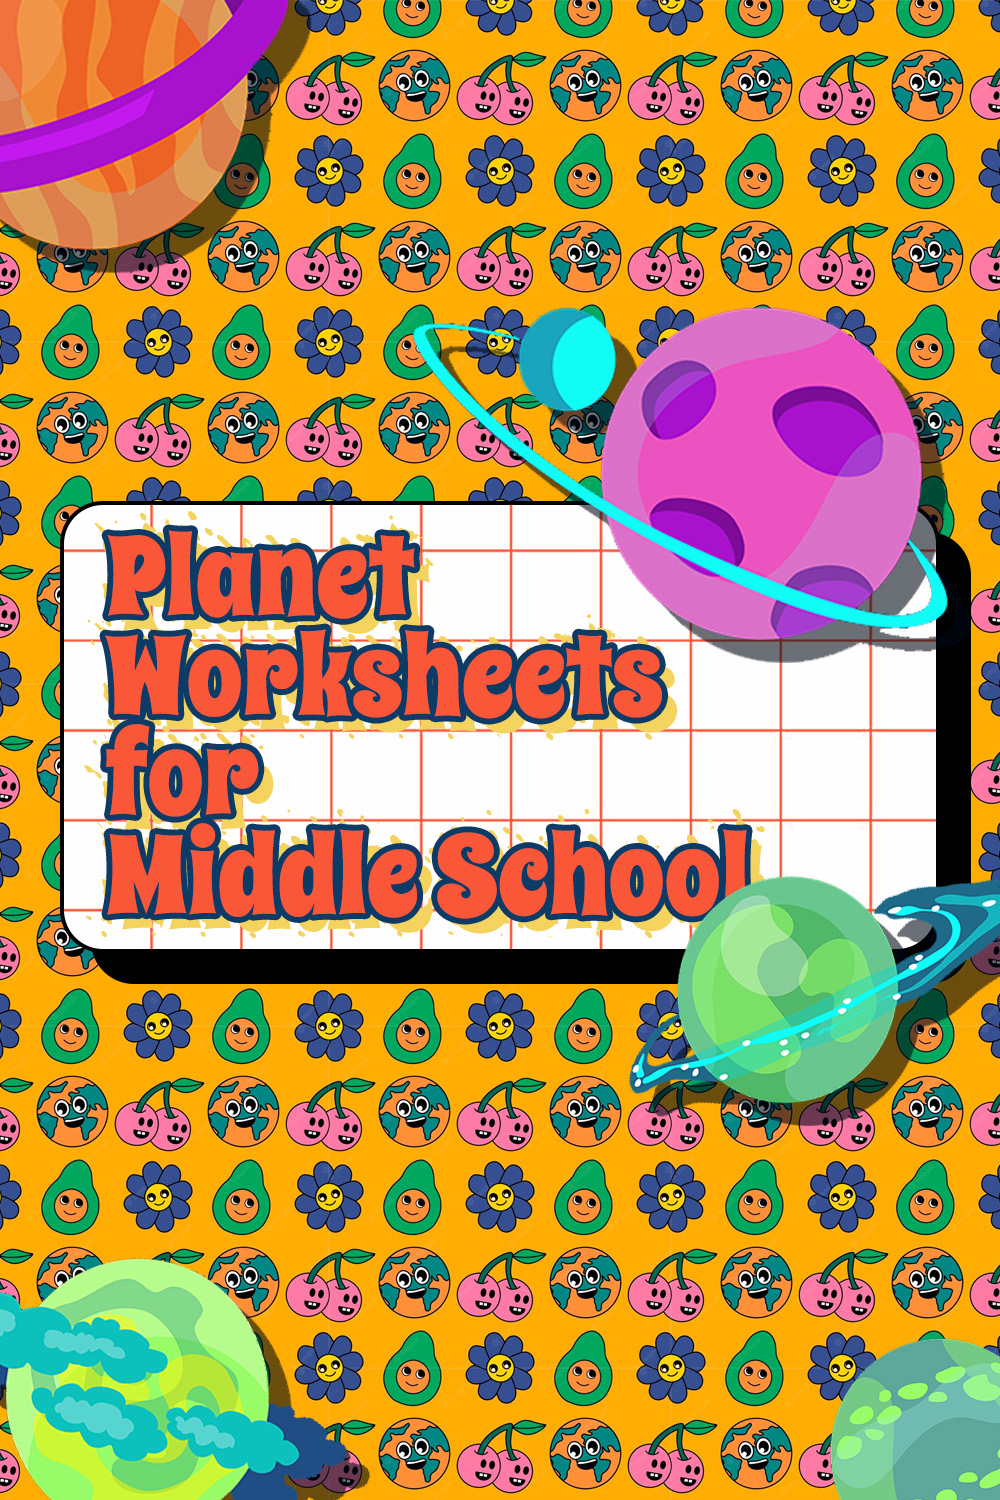 11 Images of Planet Worksheets For Middle School